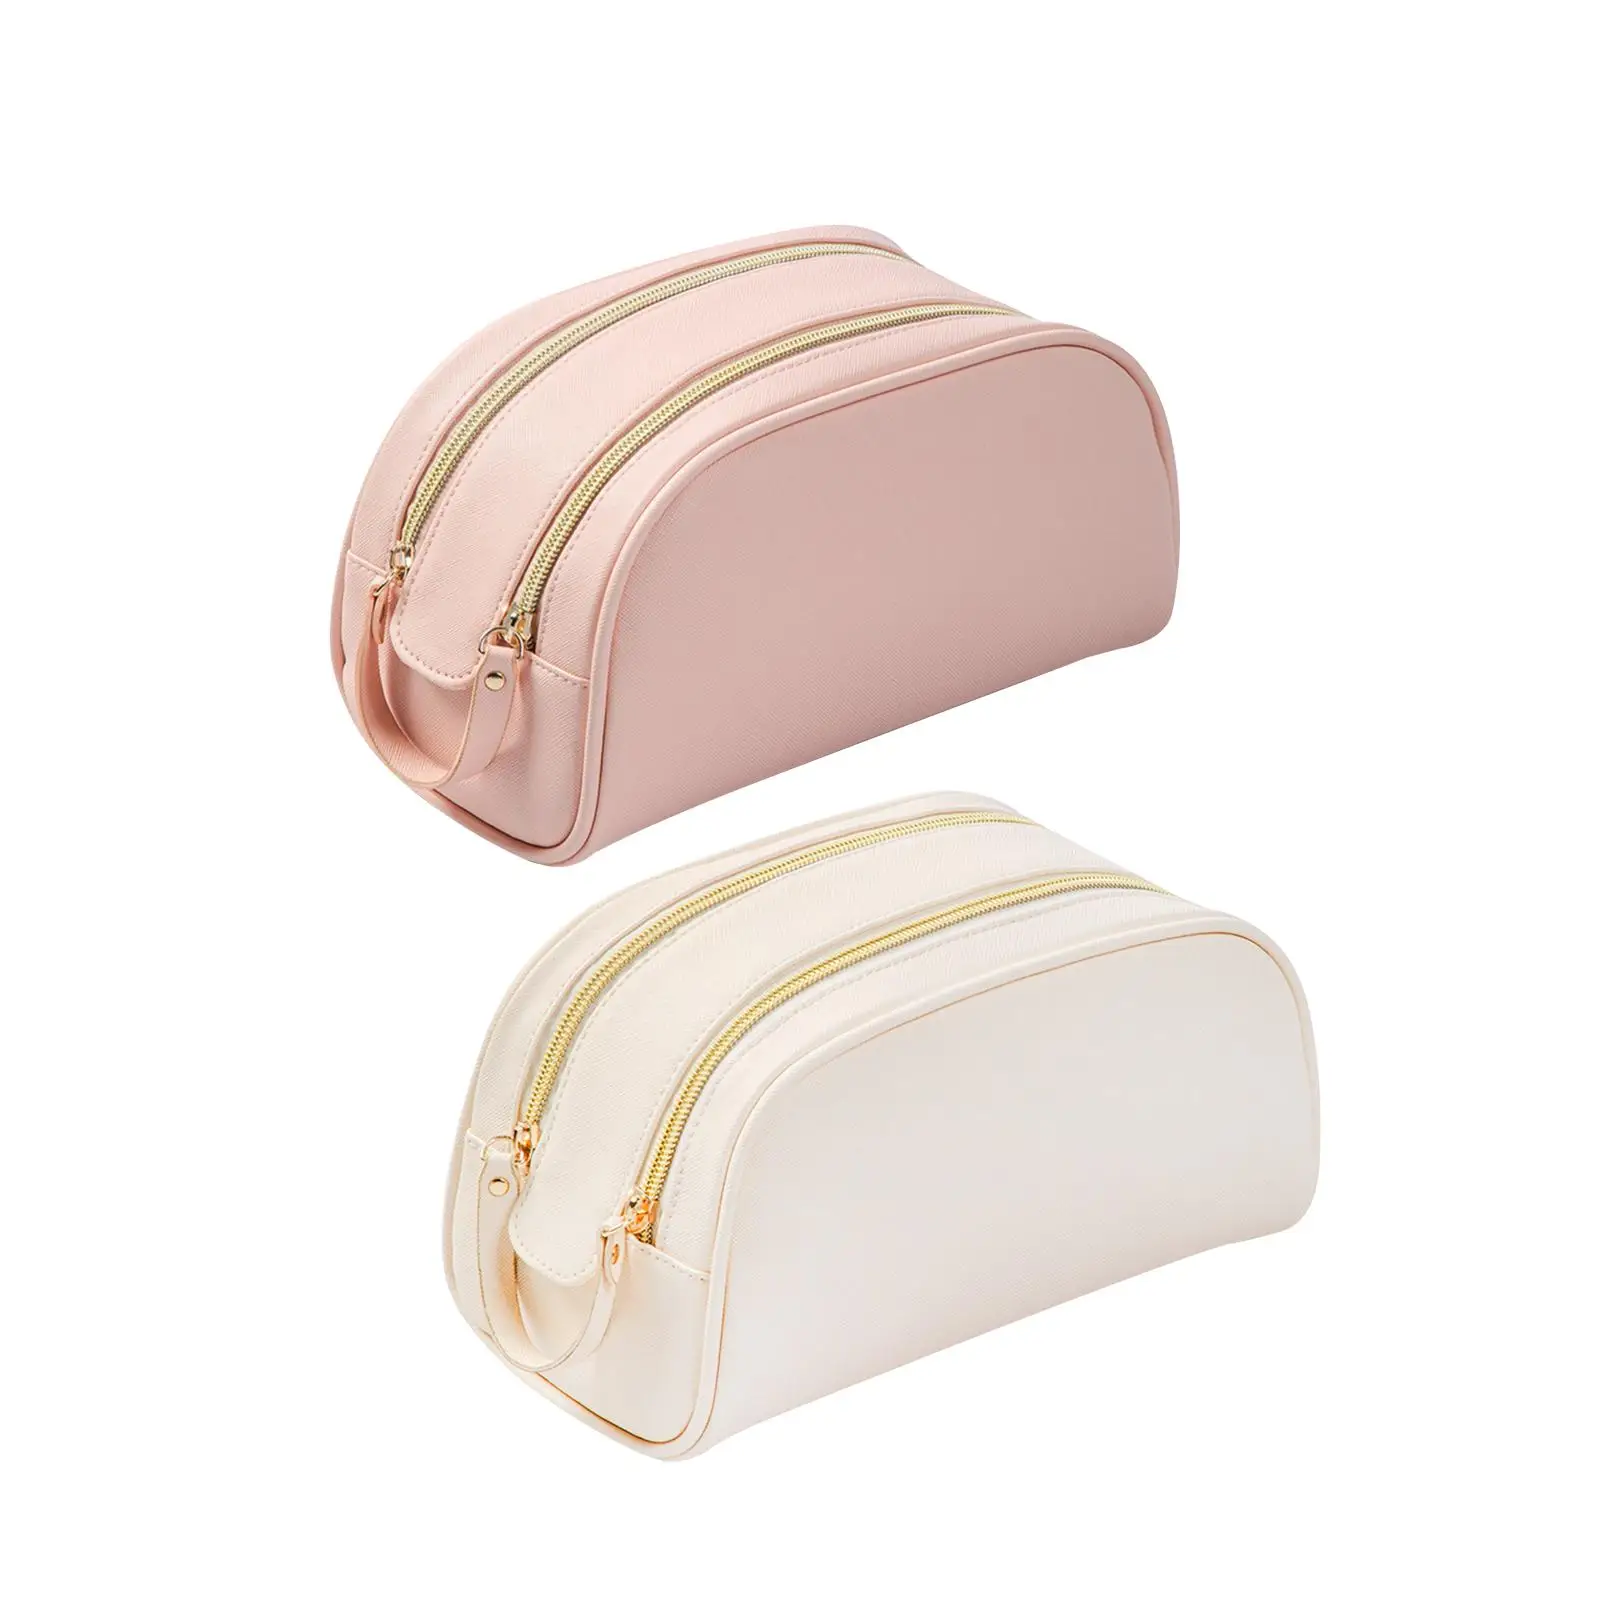 Makeup Bag Toiletry Accessories Hanging Cosmetic Bag for Travel Picnics Gym